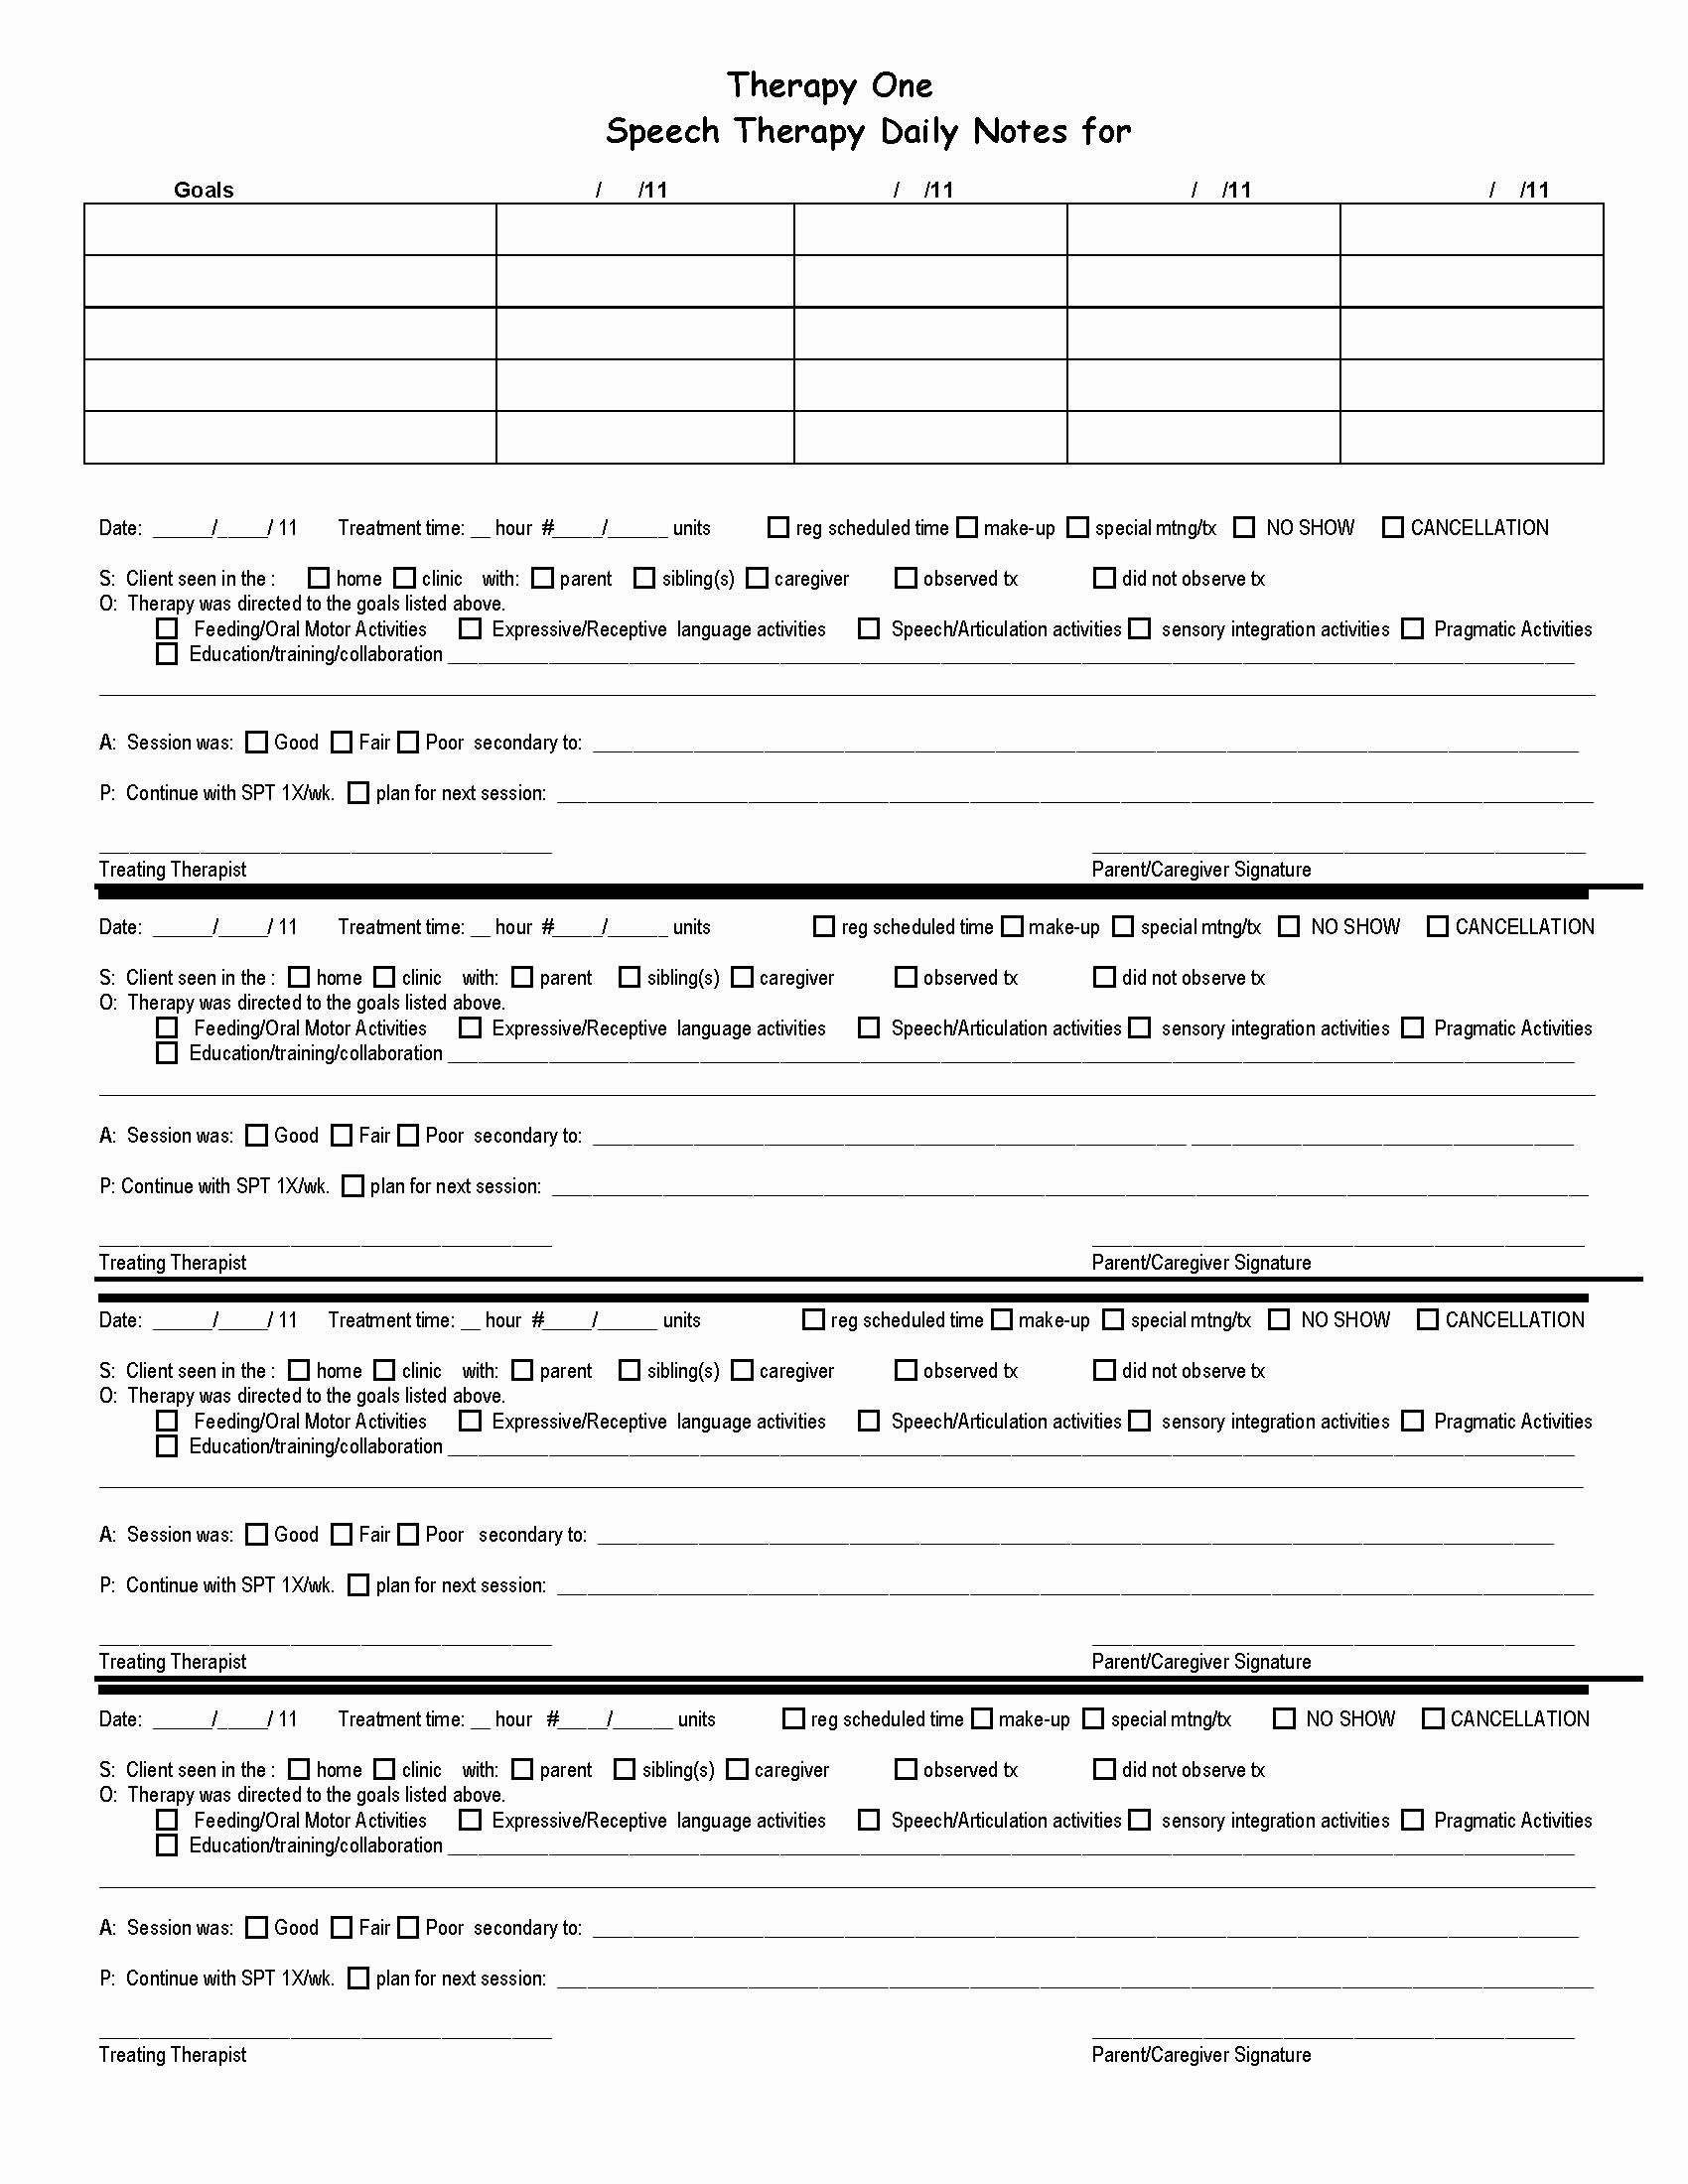 Therapy form Redesign before and after